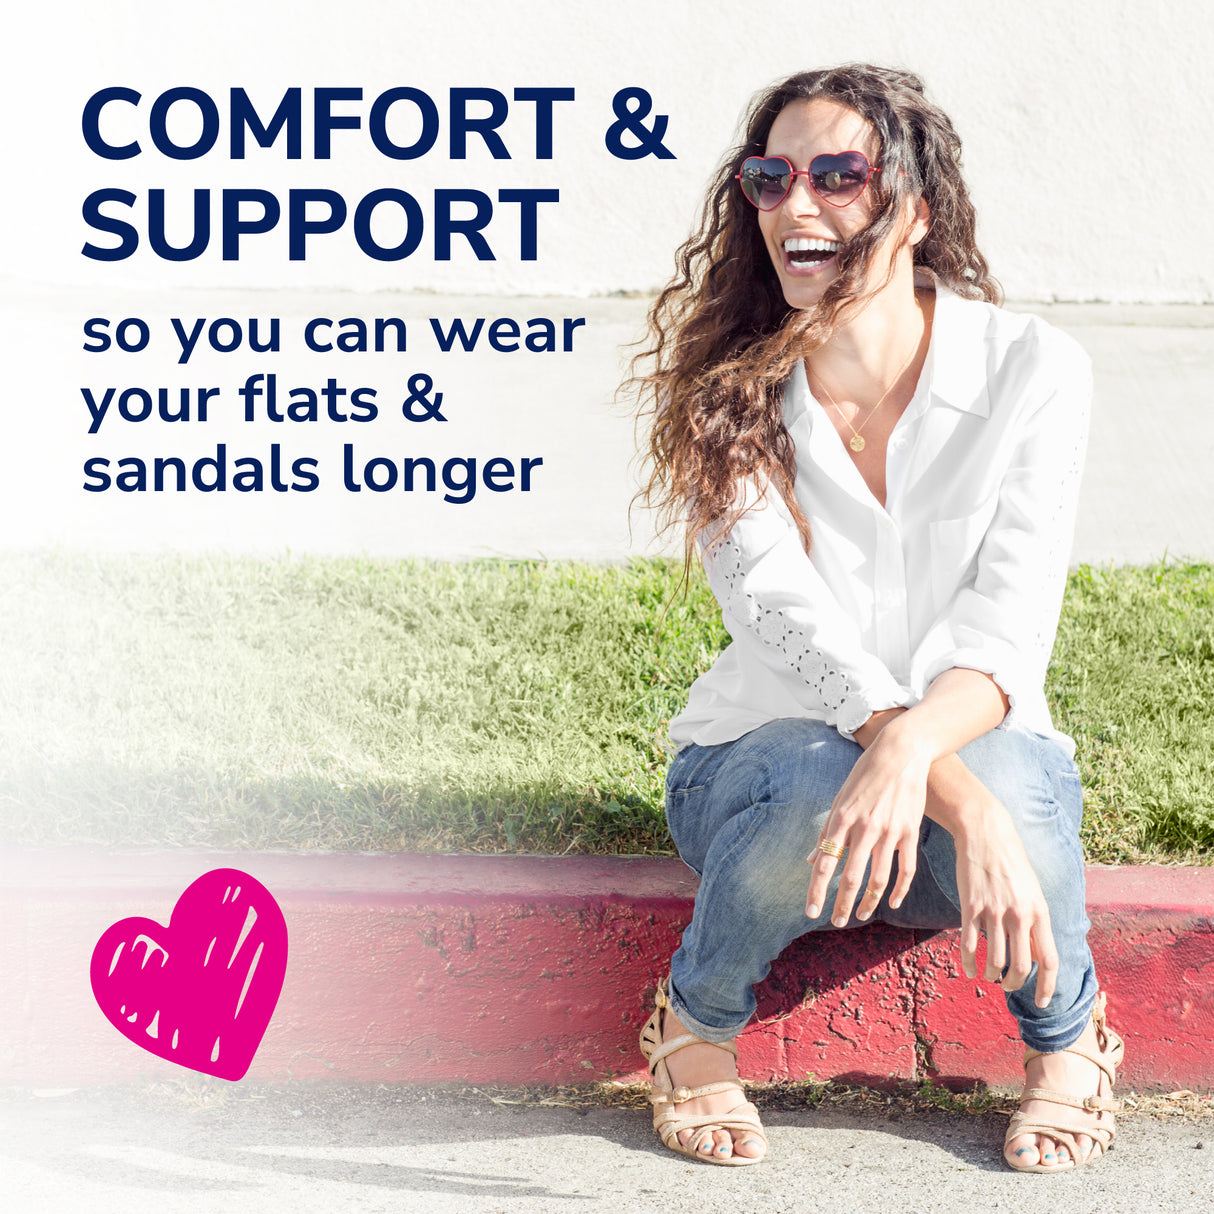 image of comfort and support so you can wear your flats and sandals longer